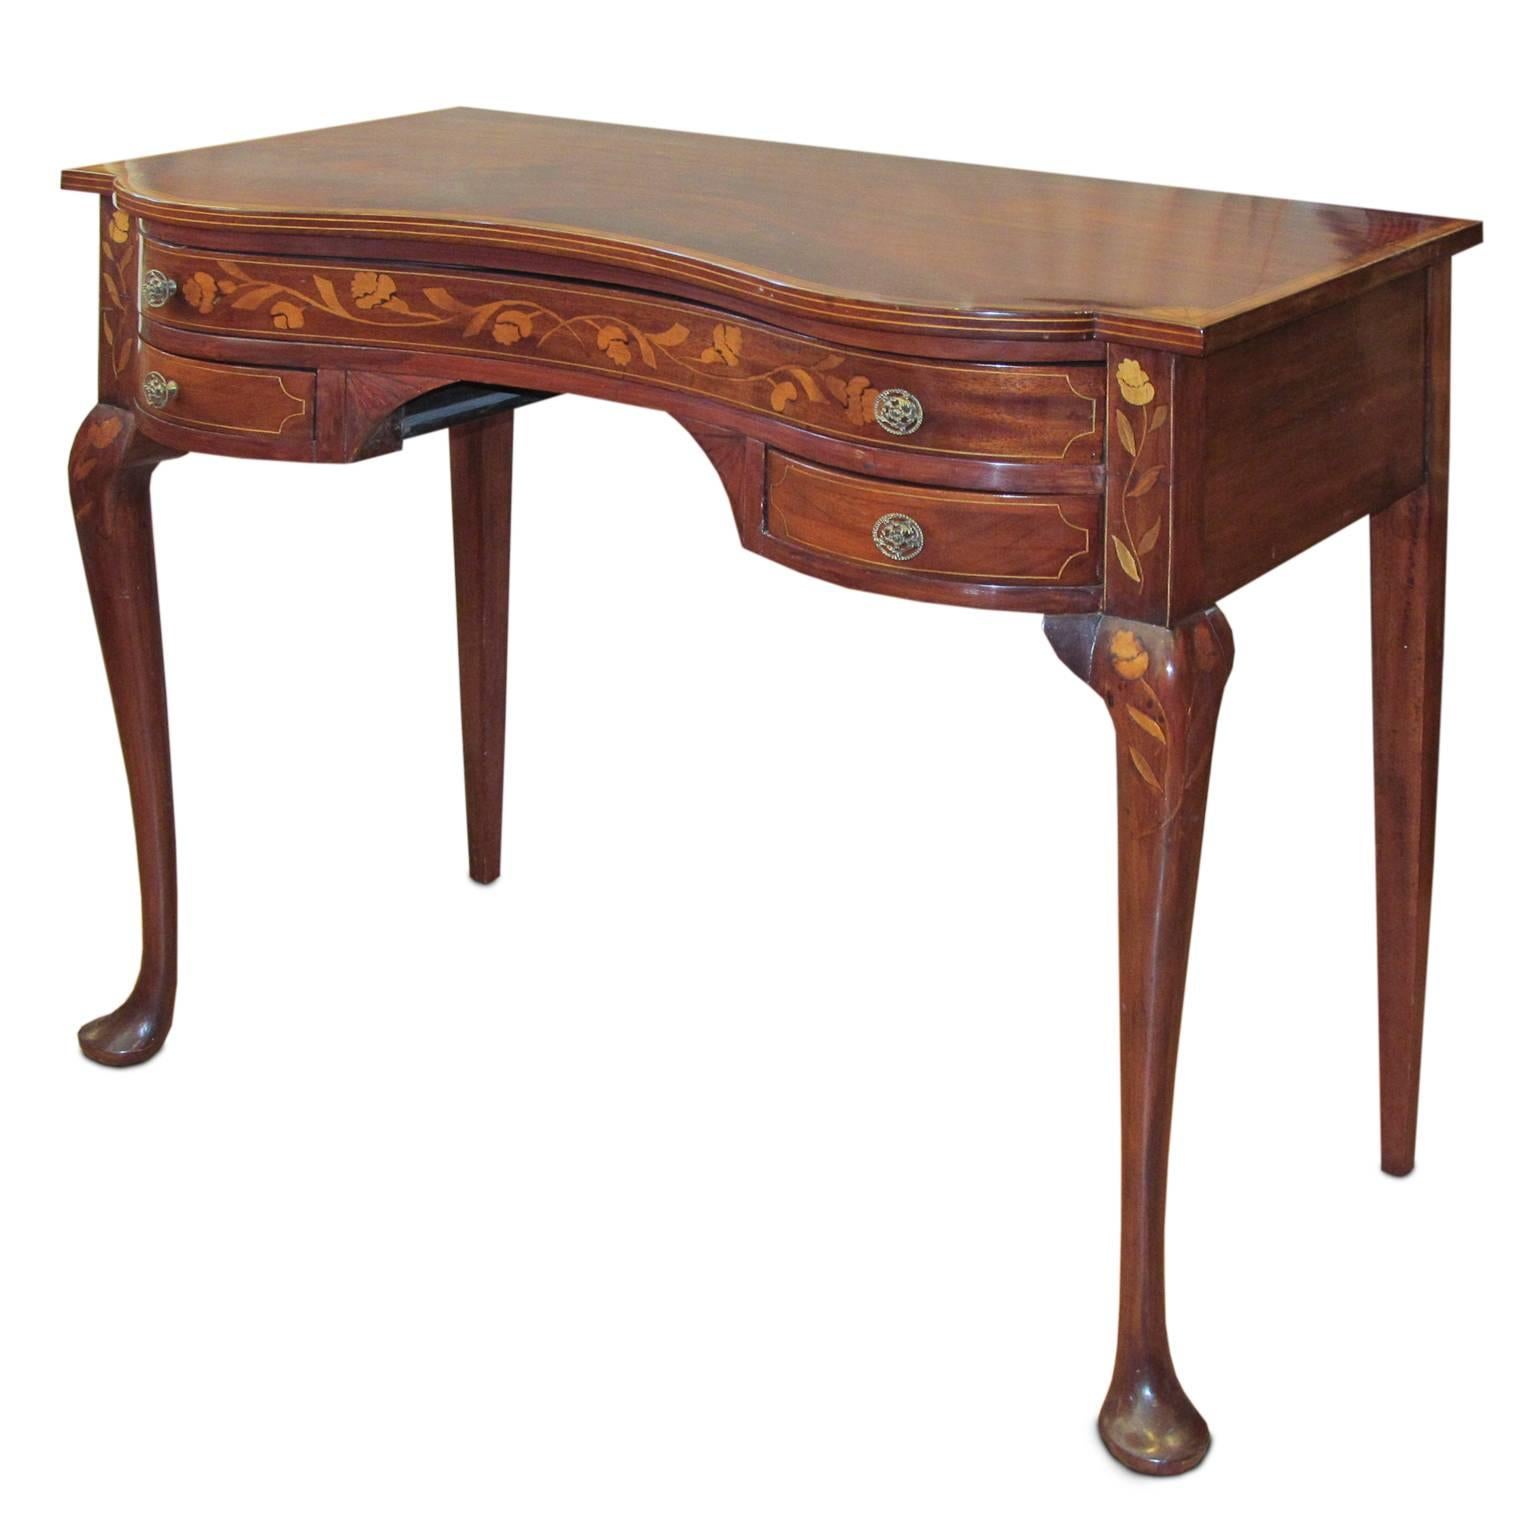 Dutch Serpentine Mahogany and Marquetry Inlaid Table For Sale